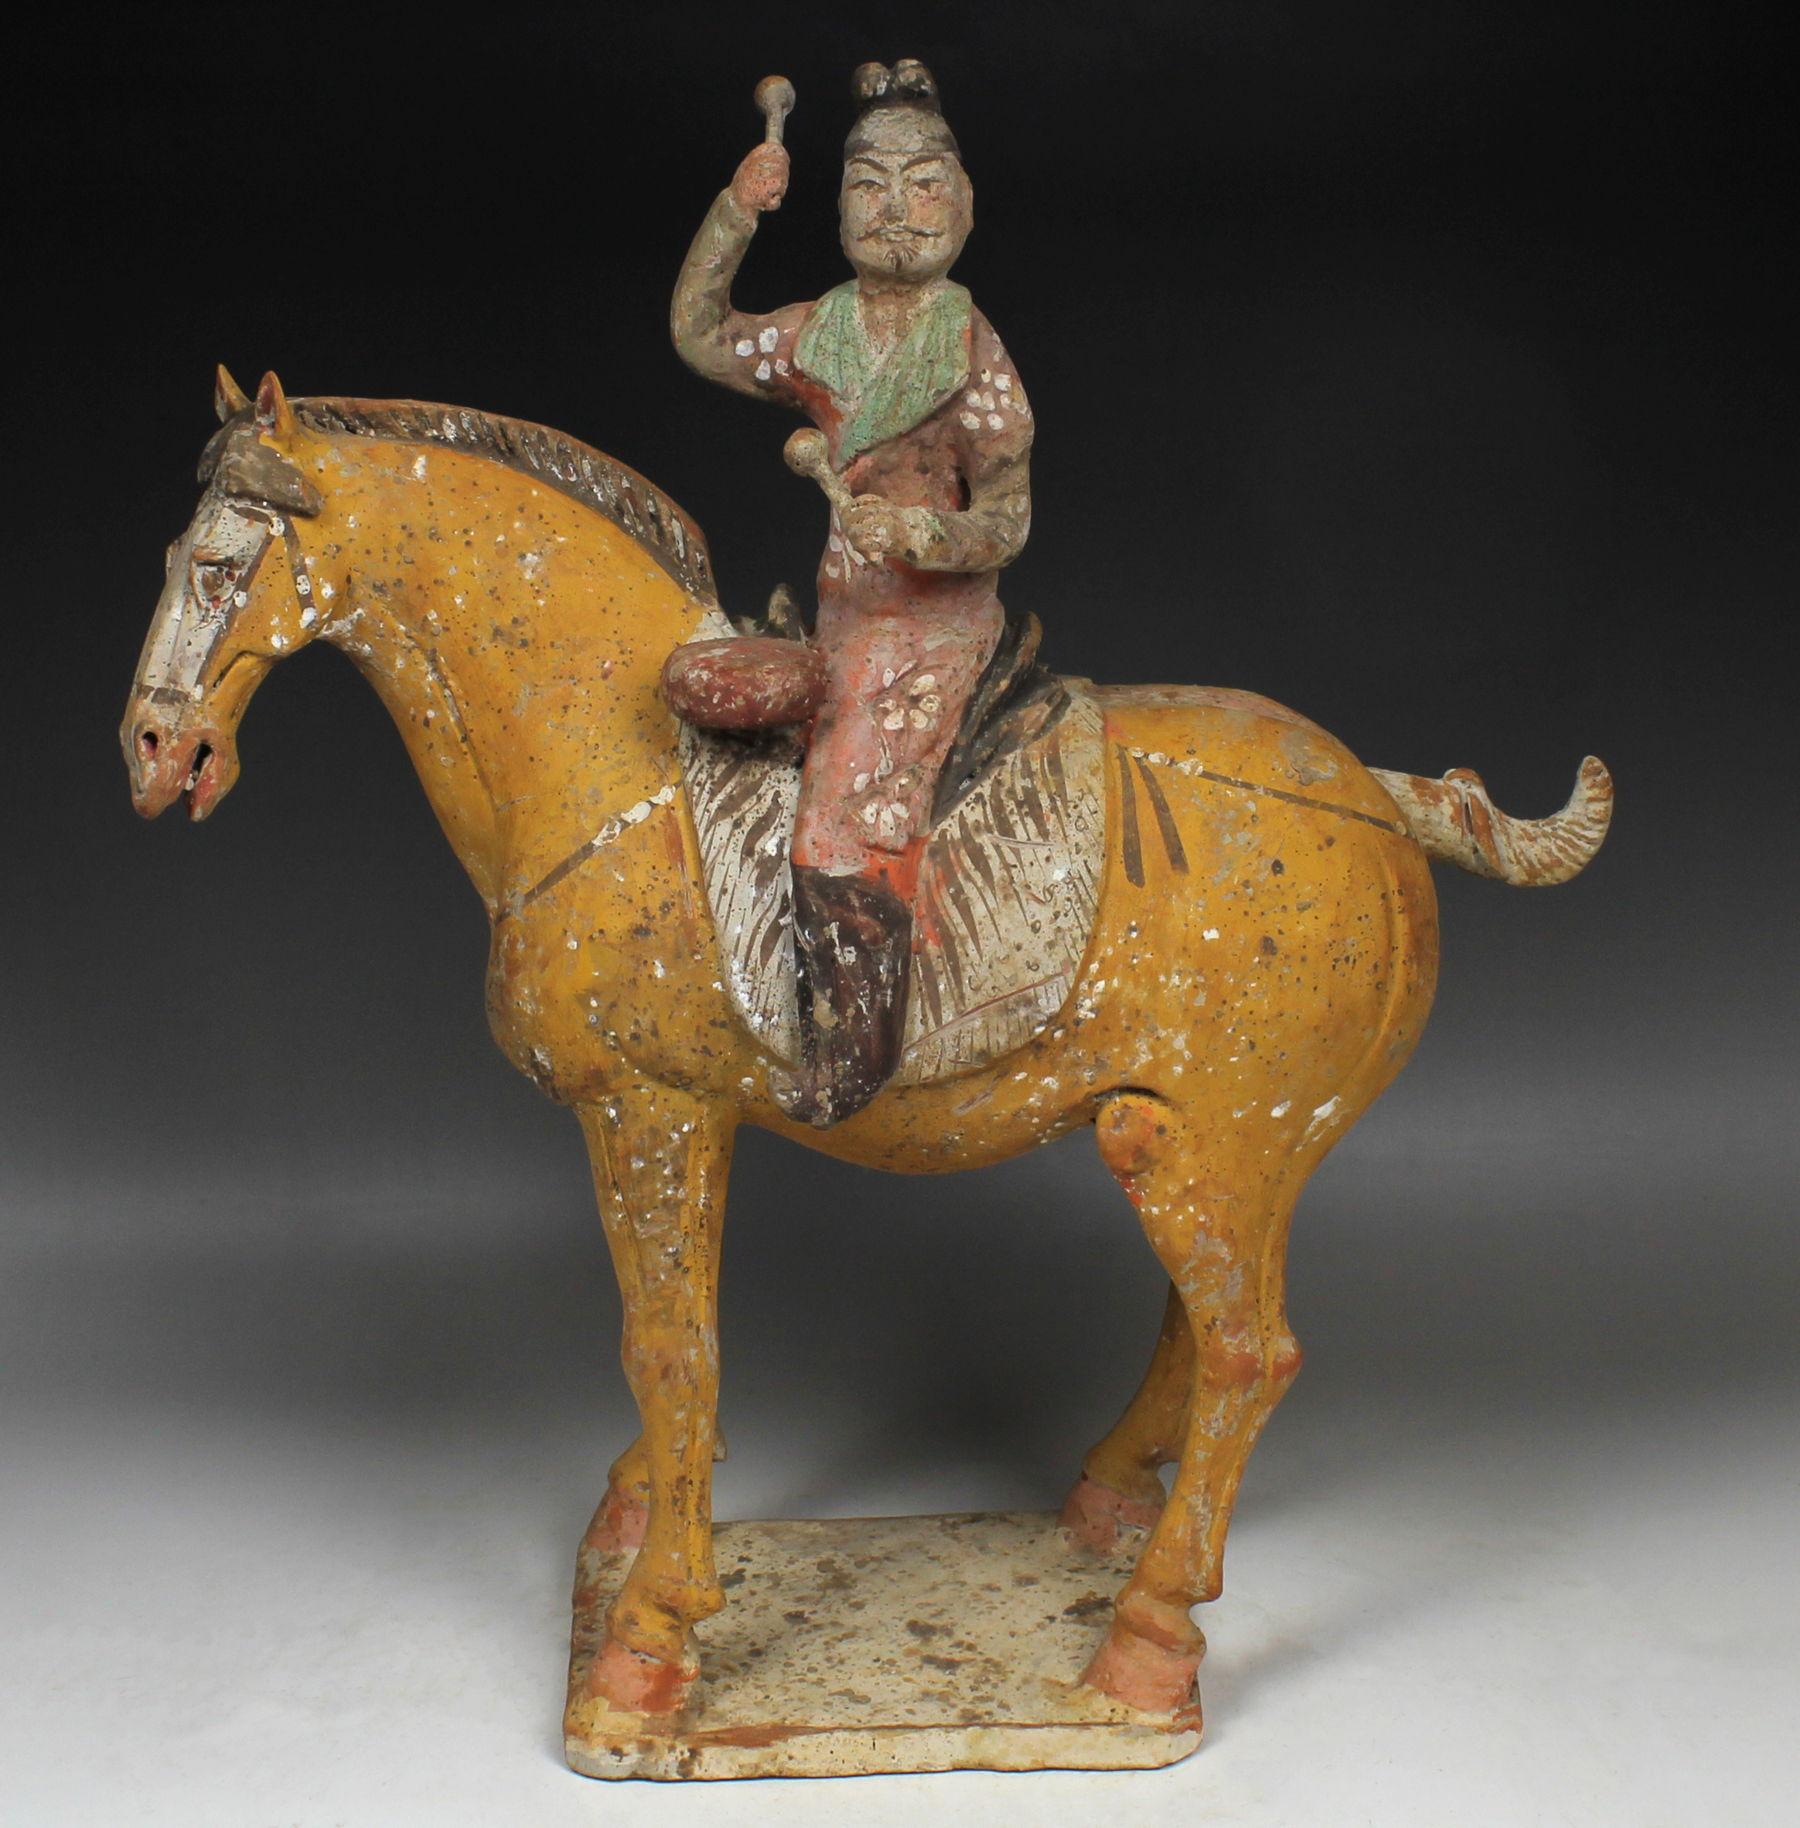 ITEM: Statuette of a horse with musician
MATERIAL: Pottery
CULTURE: Chinese, Tang Dynasty
PERIOD: 618 – 907 A.D
DIMENSIONS: 420 mm x 365 mm x 145 mm
CONDITION: Good condition. Includes Thermoluminescence test by Oxford Authentication (Sample